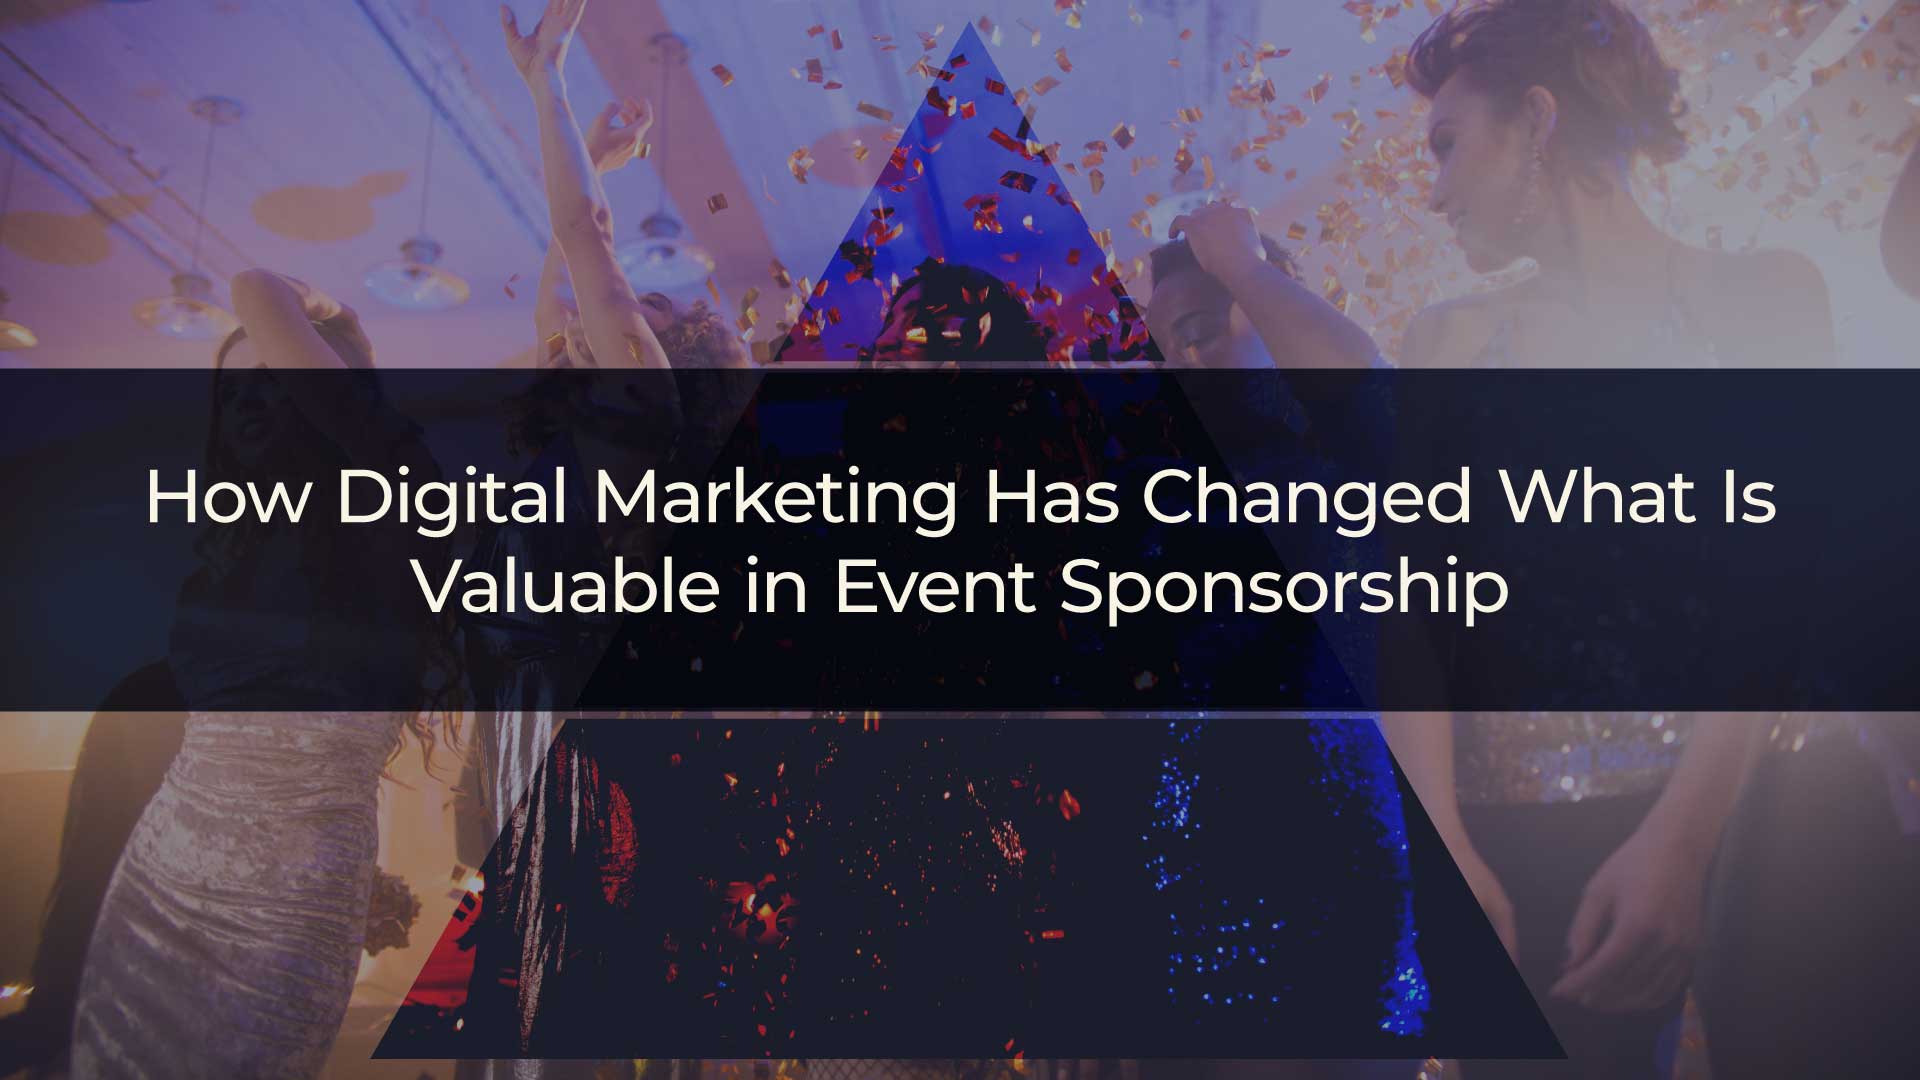 How Digital Marketing Has Changed What Is Valuable in Event Sponsorship